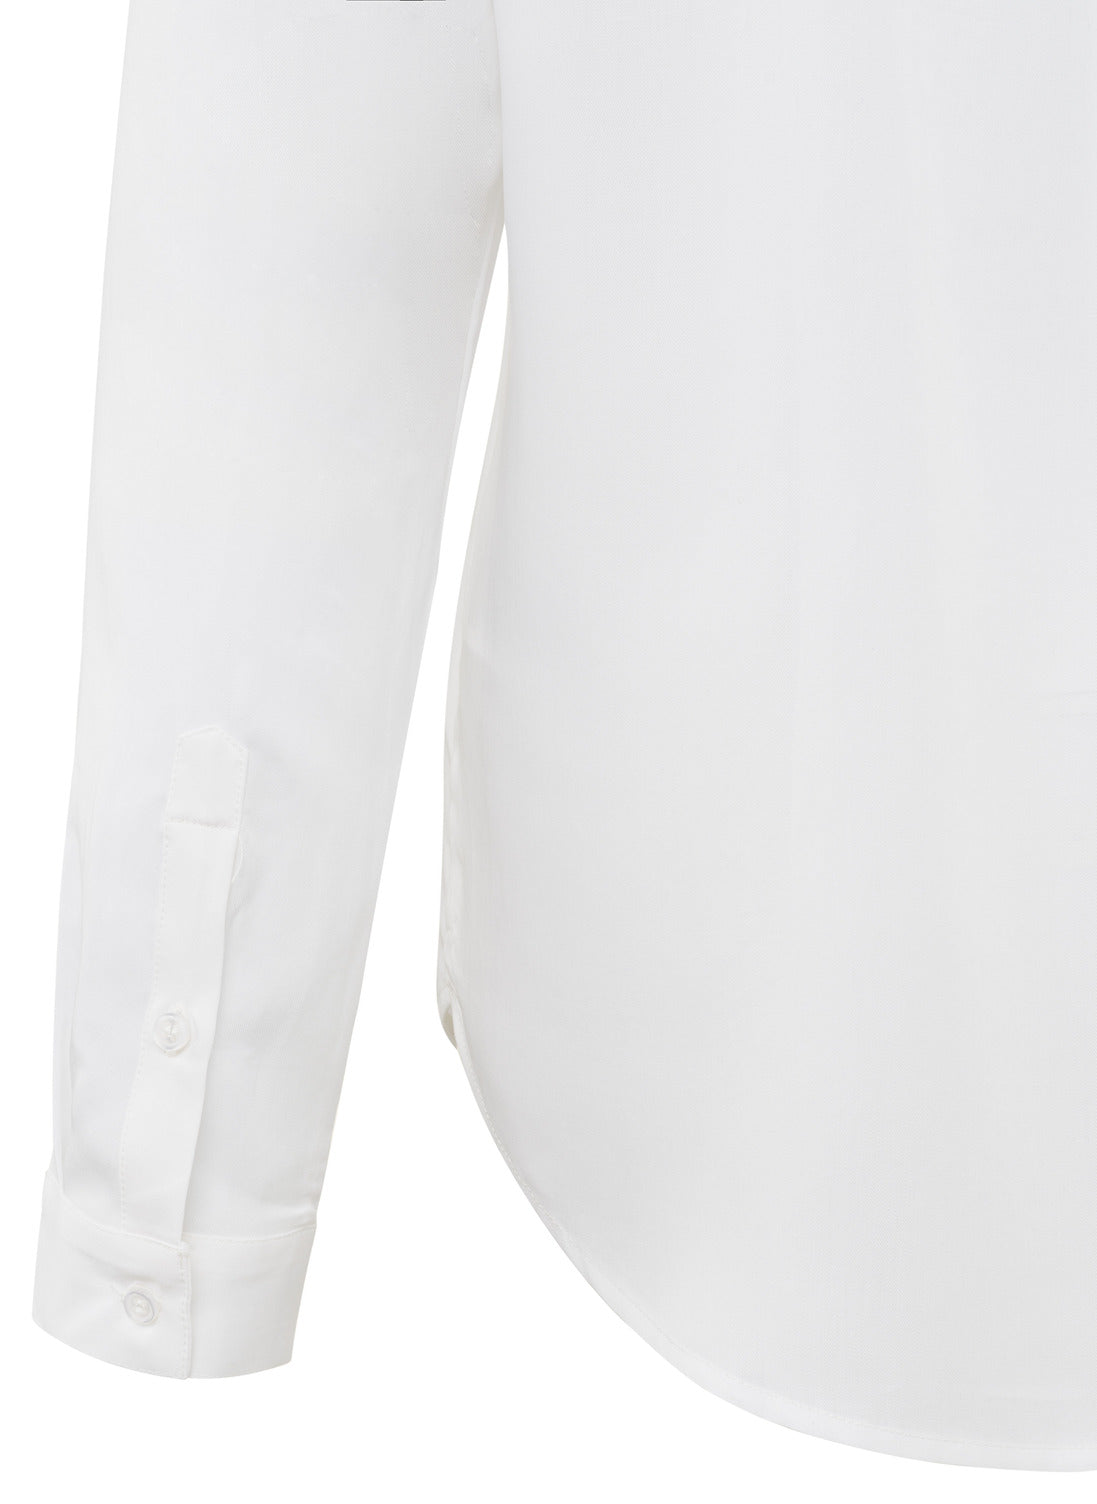 Spring 2024 Yaya soft poplin blouse in white classic basic button up sleeve detail